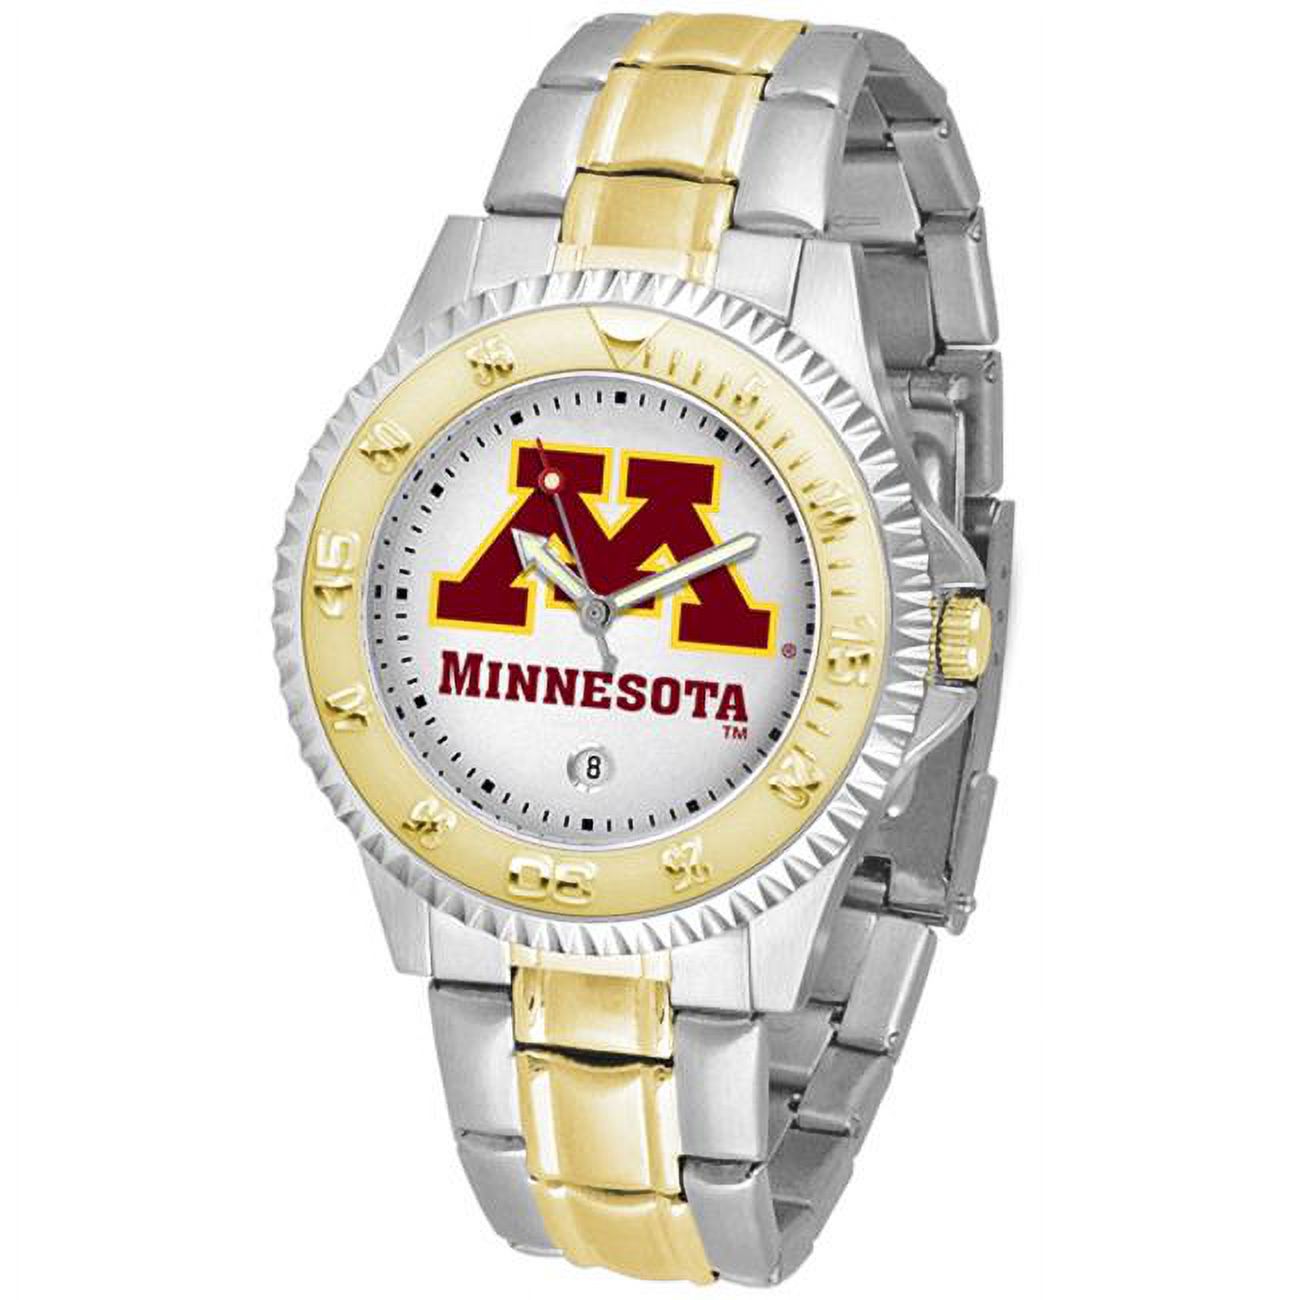 Suntime ST-CO3-MNG-COMPMG Minnesota Gophers-Competitor Two-Tone Watch - image 1 of 2